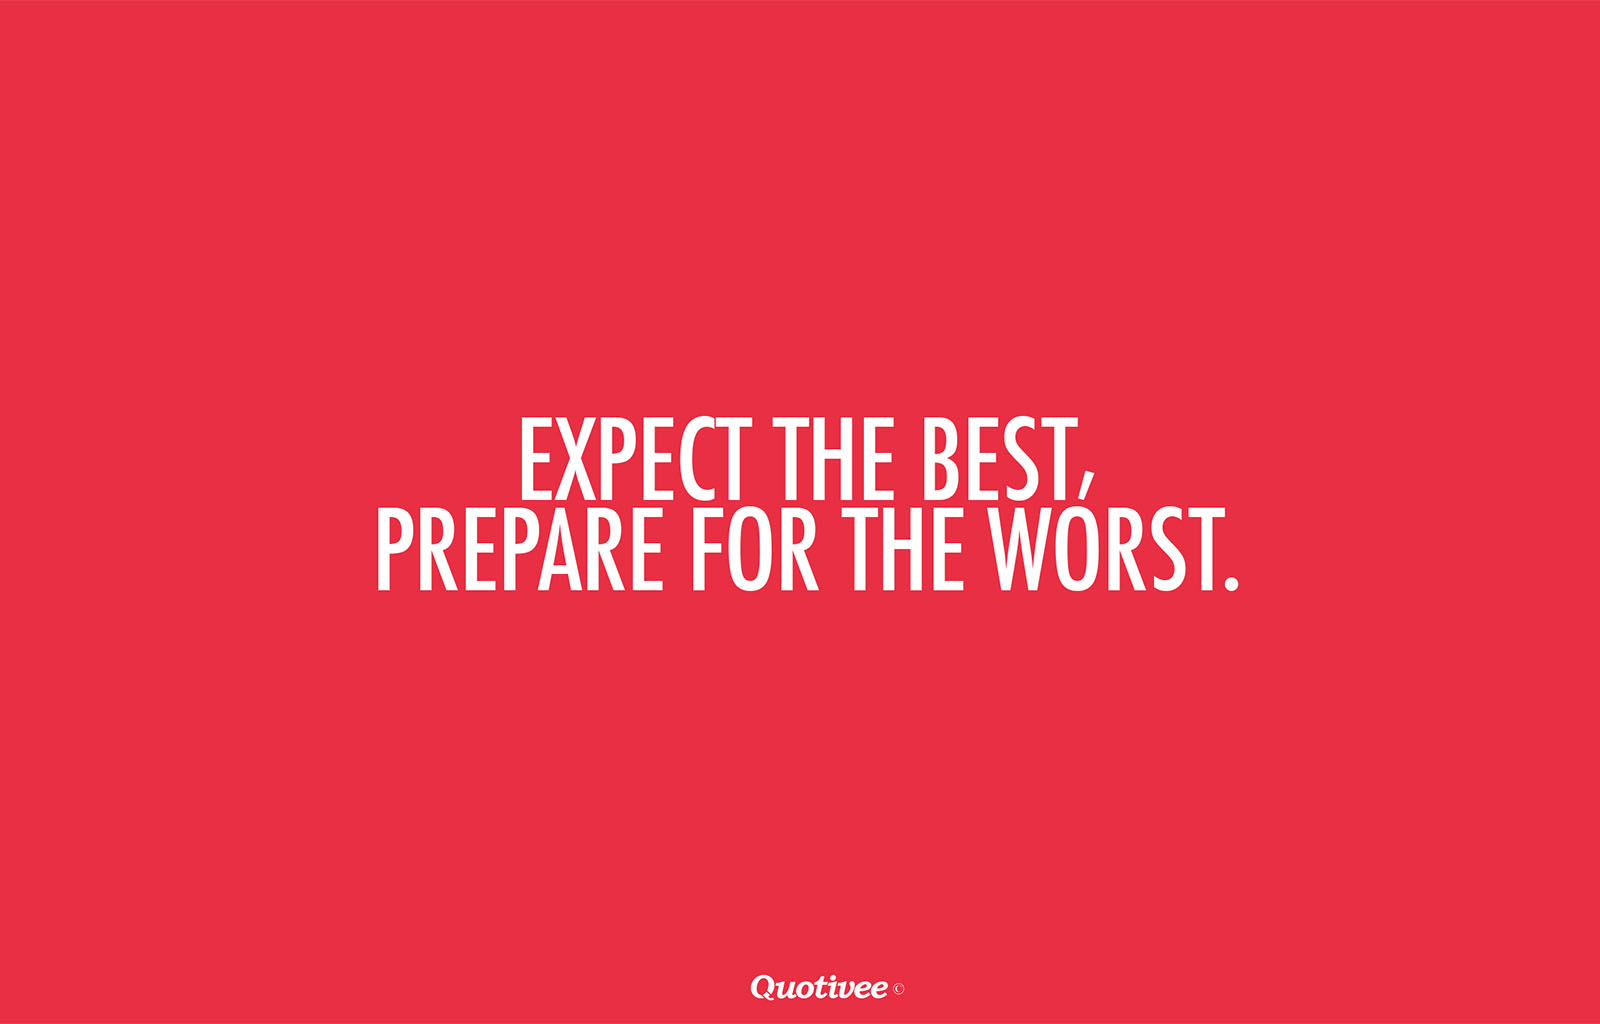 Expect The Worst Quotes. QuotesGram